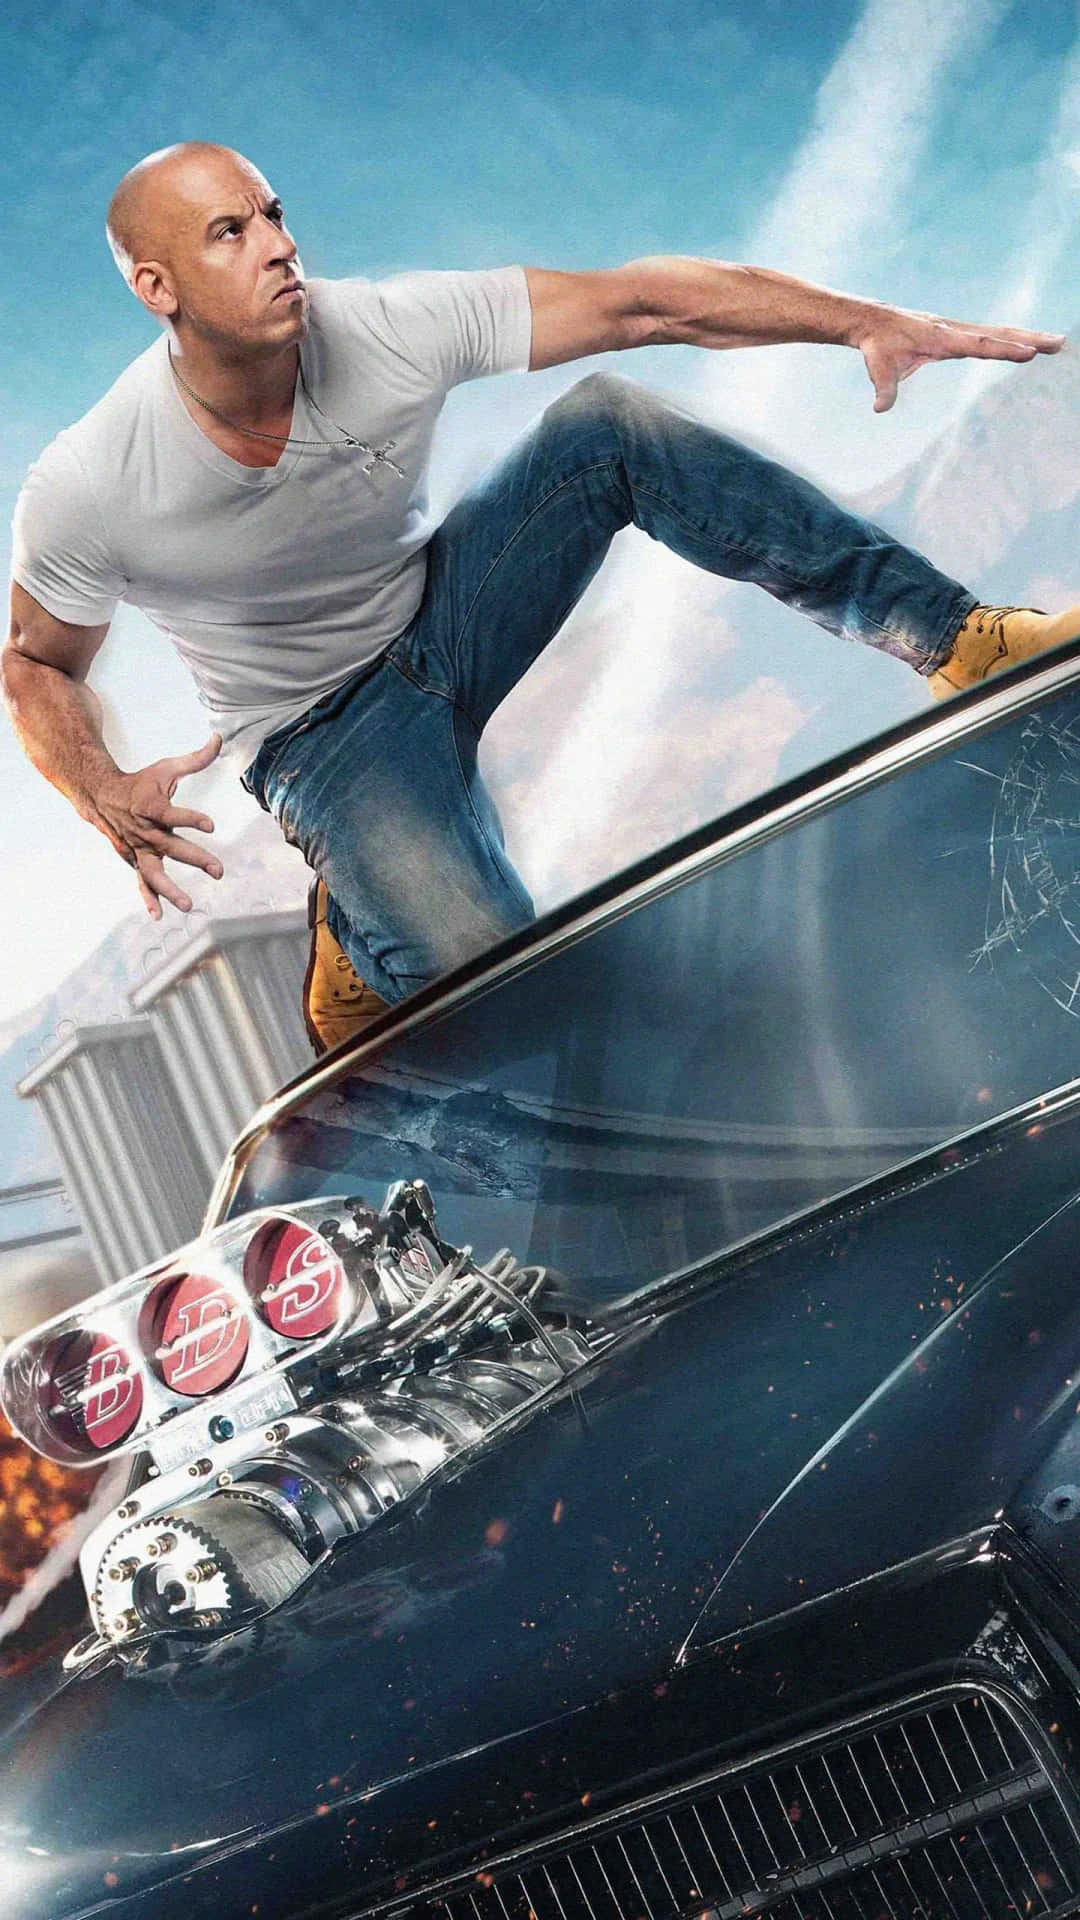 Fast And Furious 7 - A Man Jumping On Top Of A Car Wallpaper